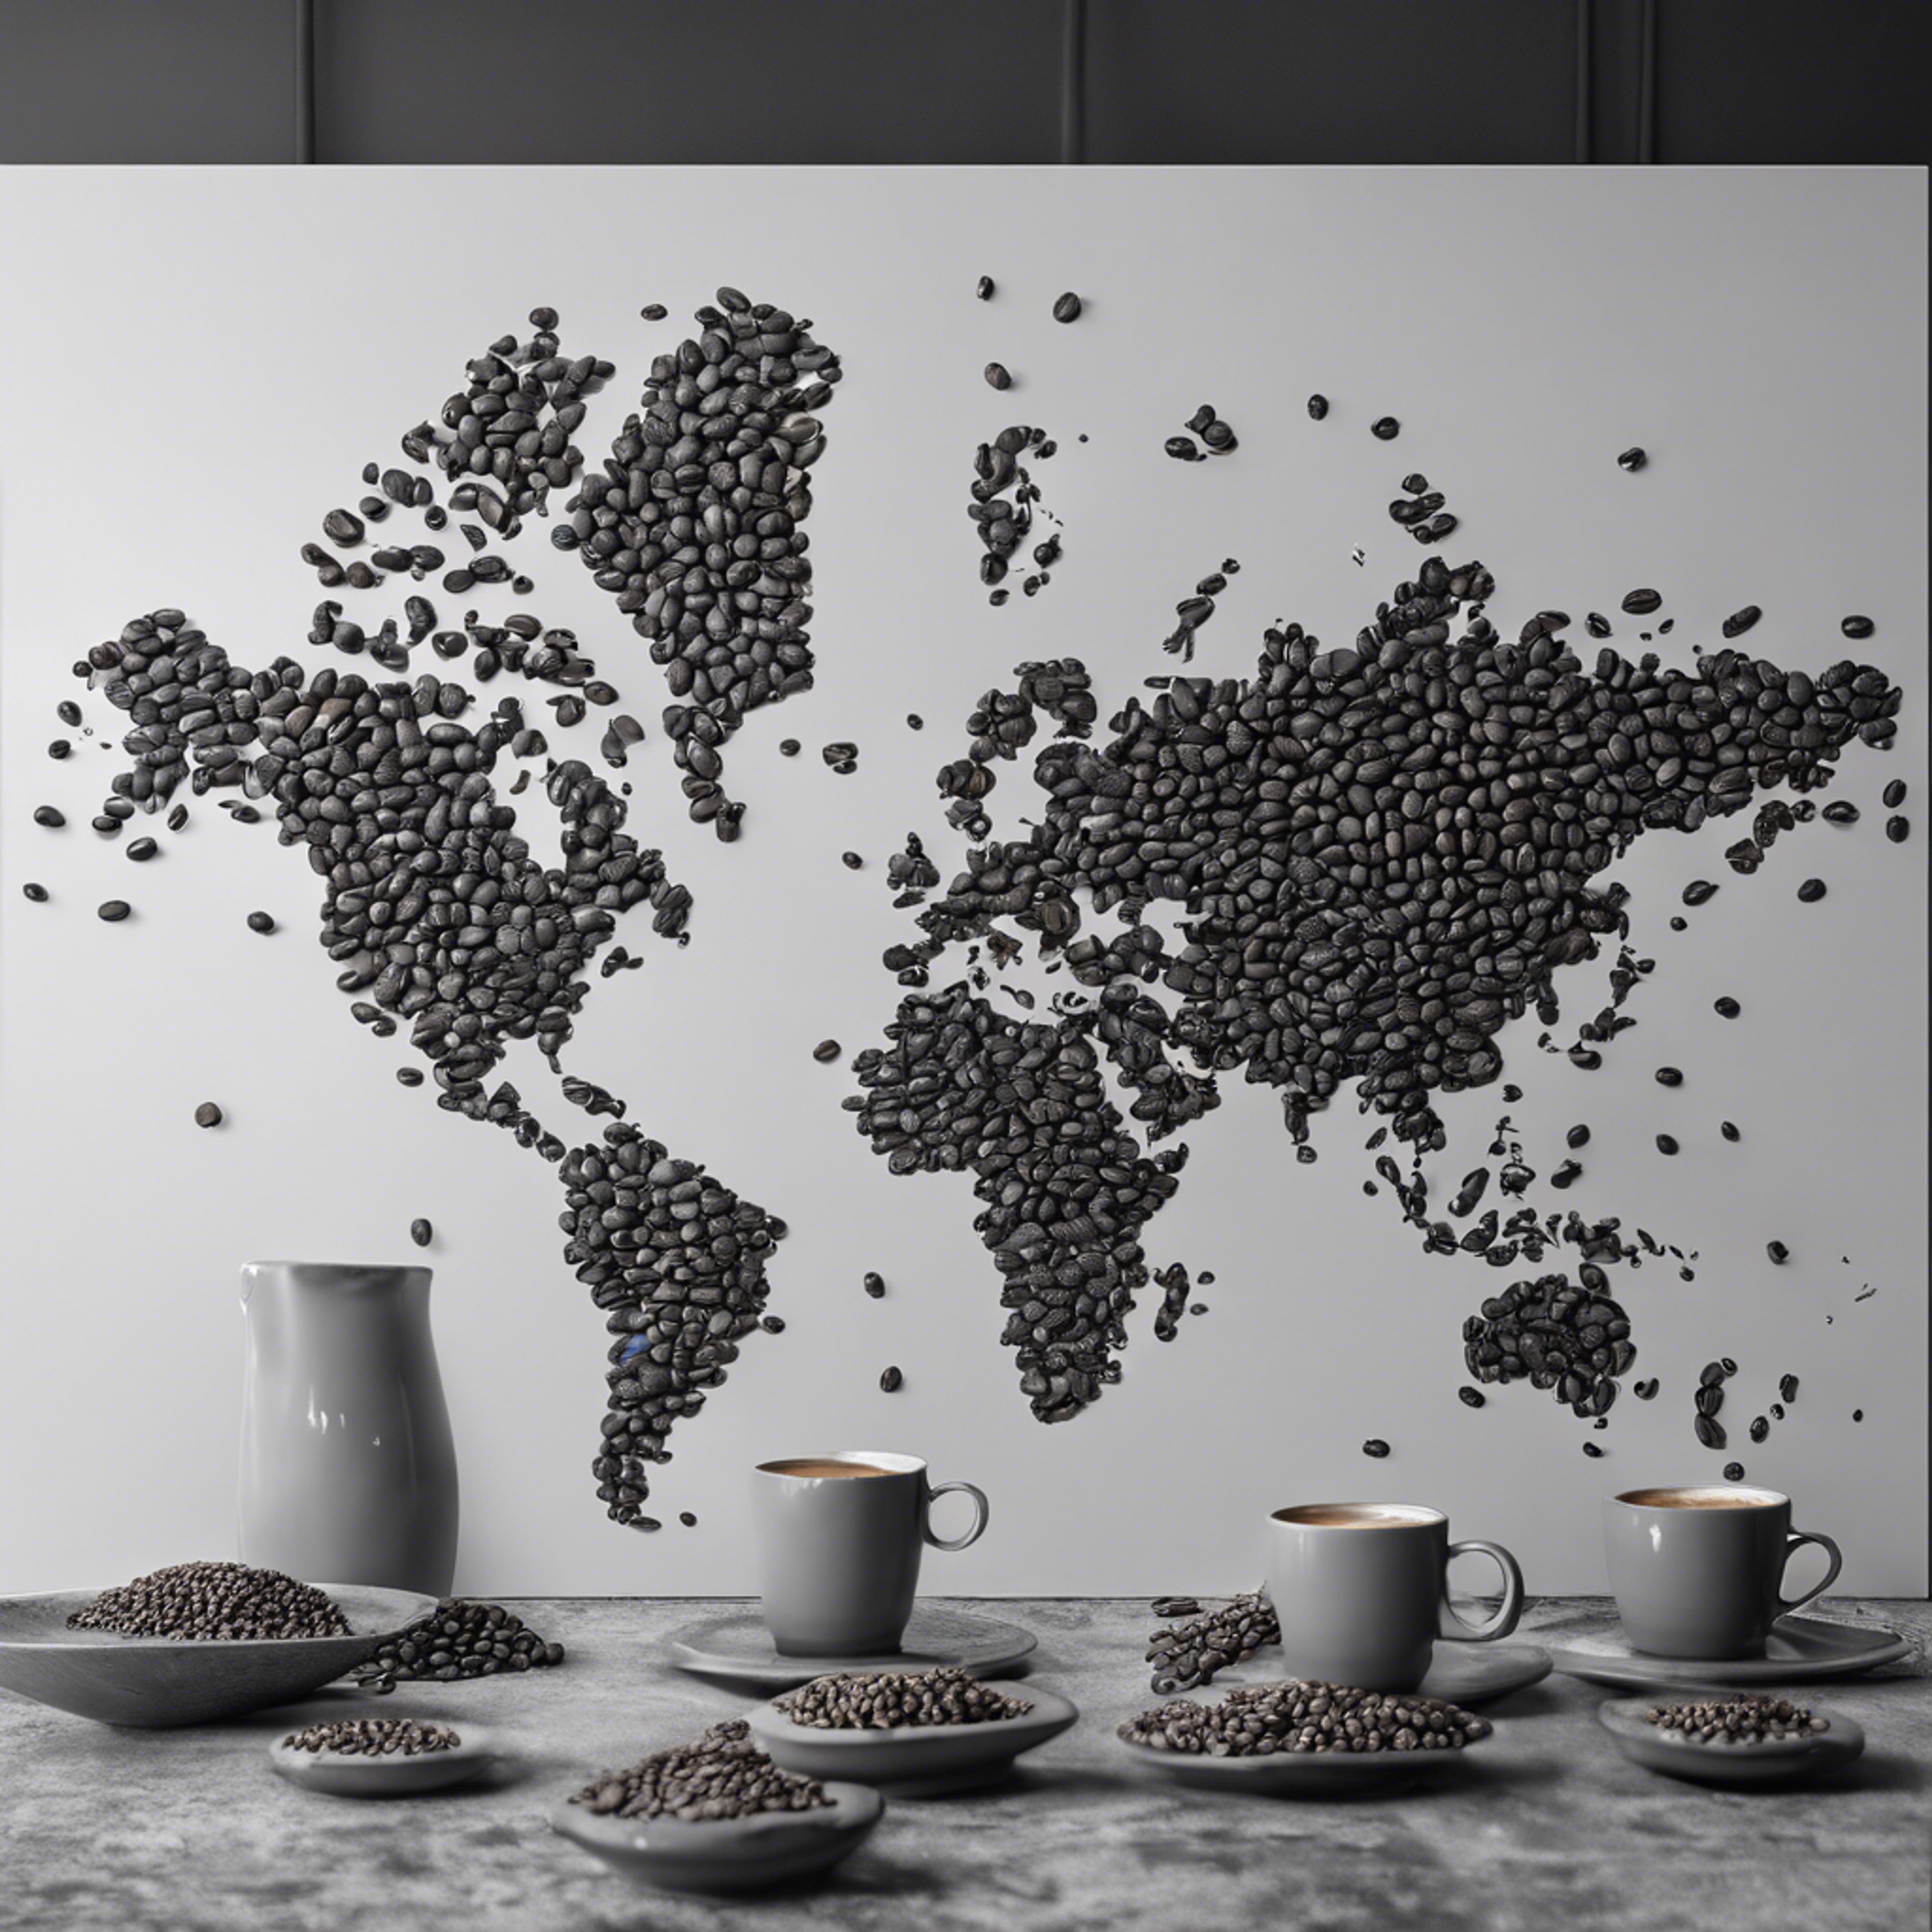 A grayscale world map laid out with coffee beans on a cafe table. Wallpaper[a42175c9d73a43528667]